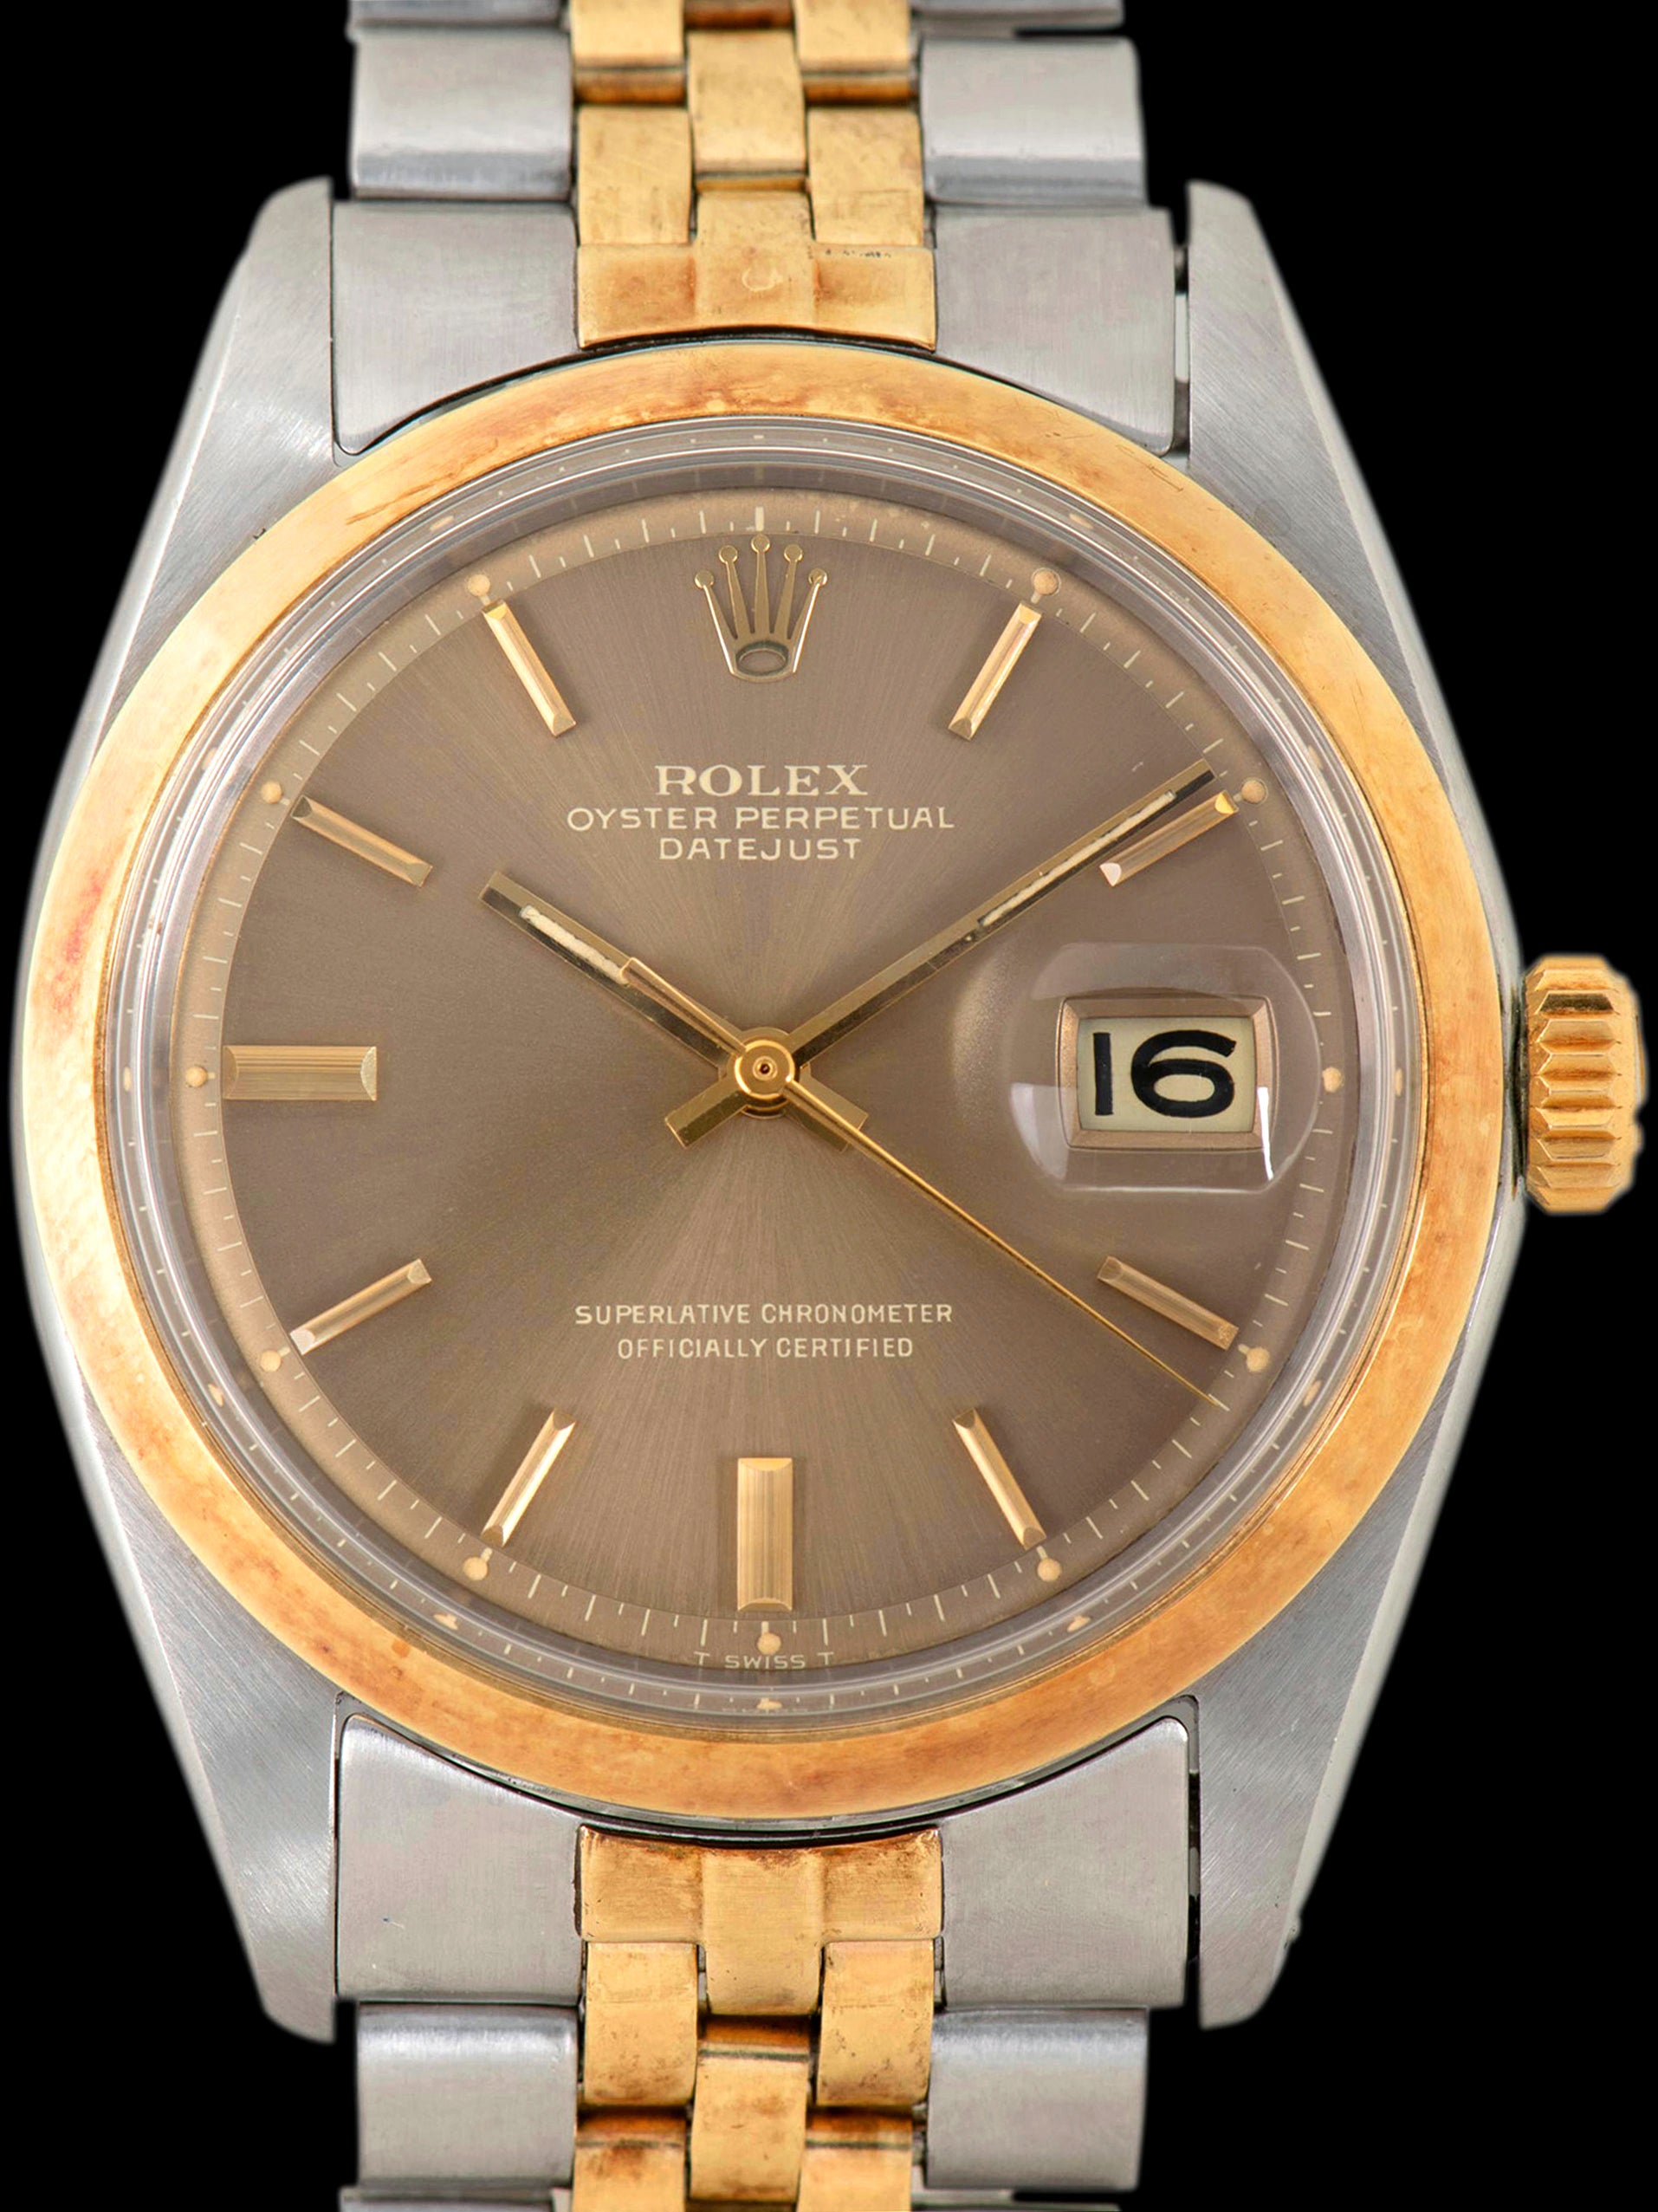 1968 Rolex Two-Tone Datejust (Ref. 1600) Taupe "Ghost" Dial